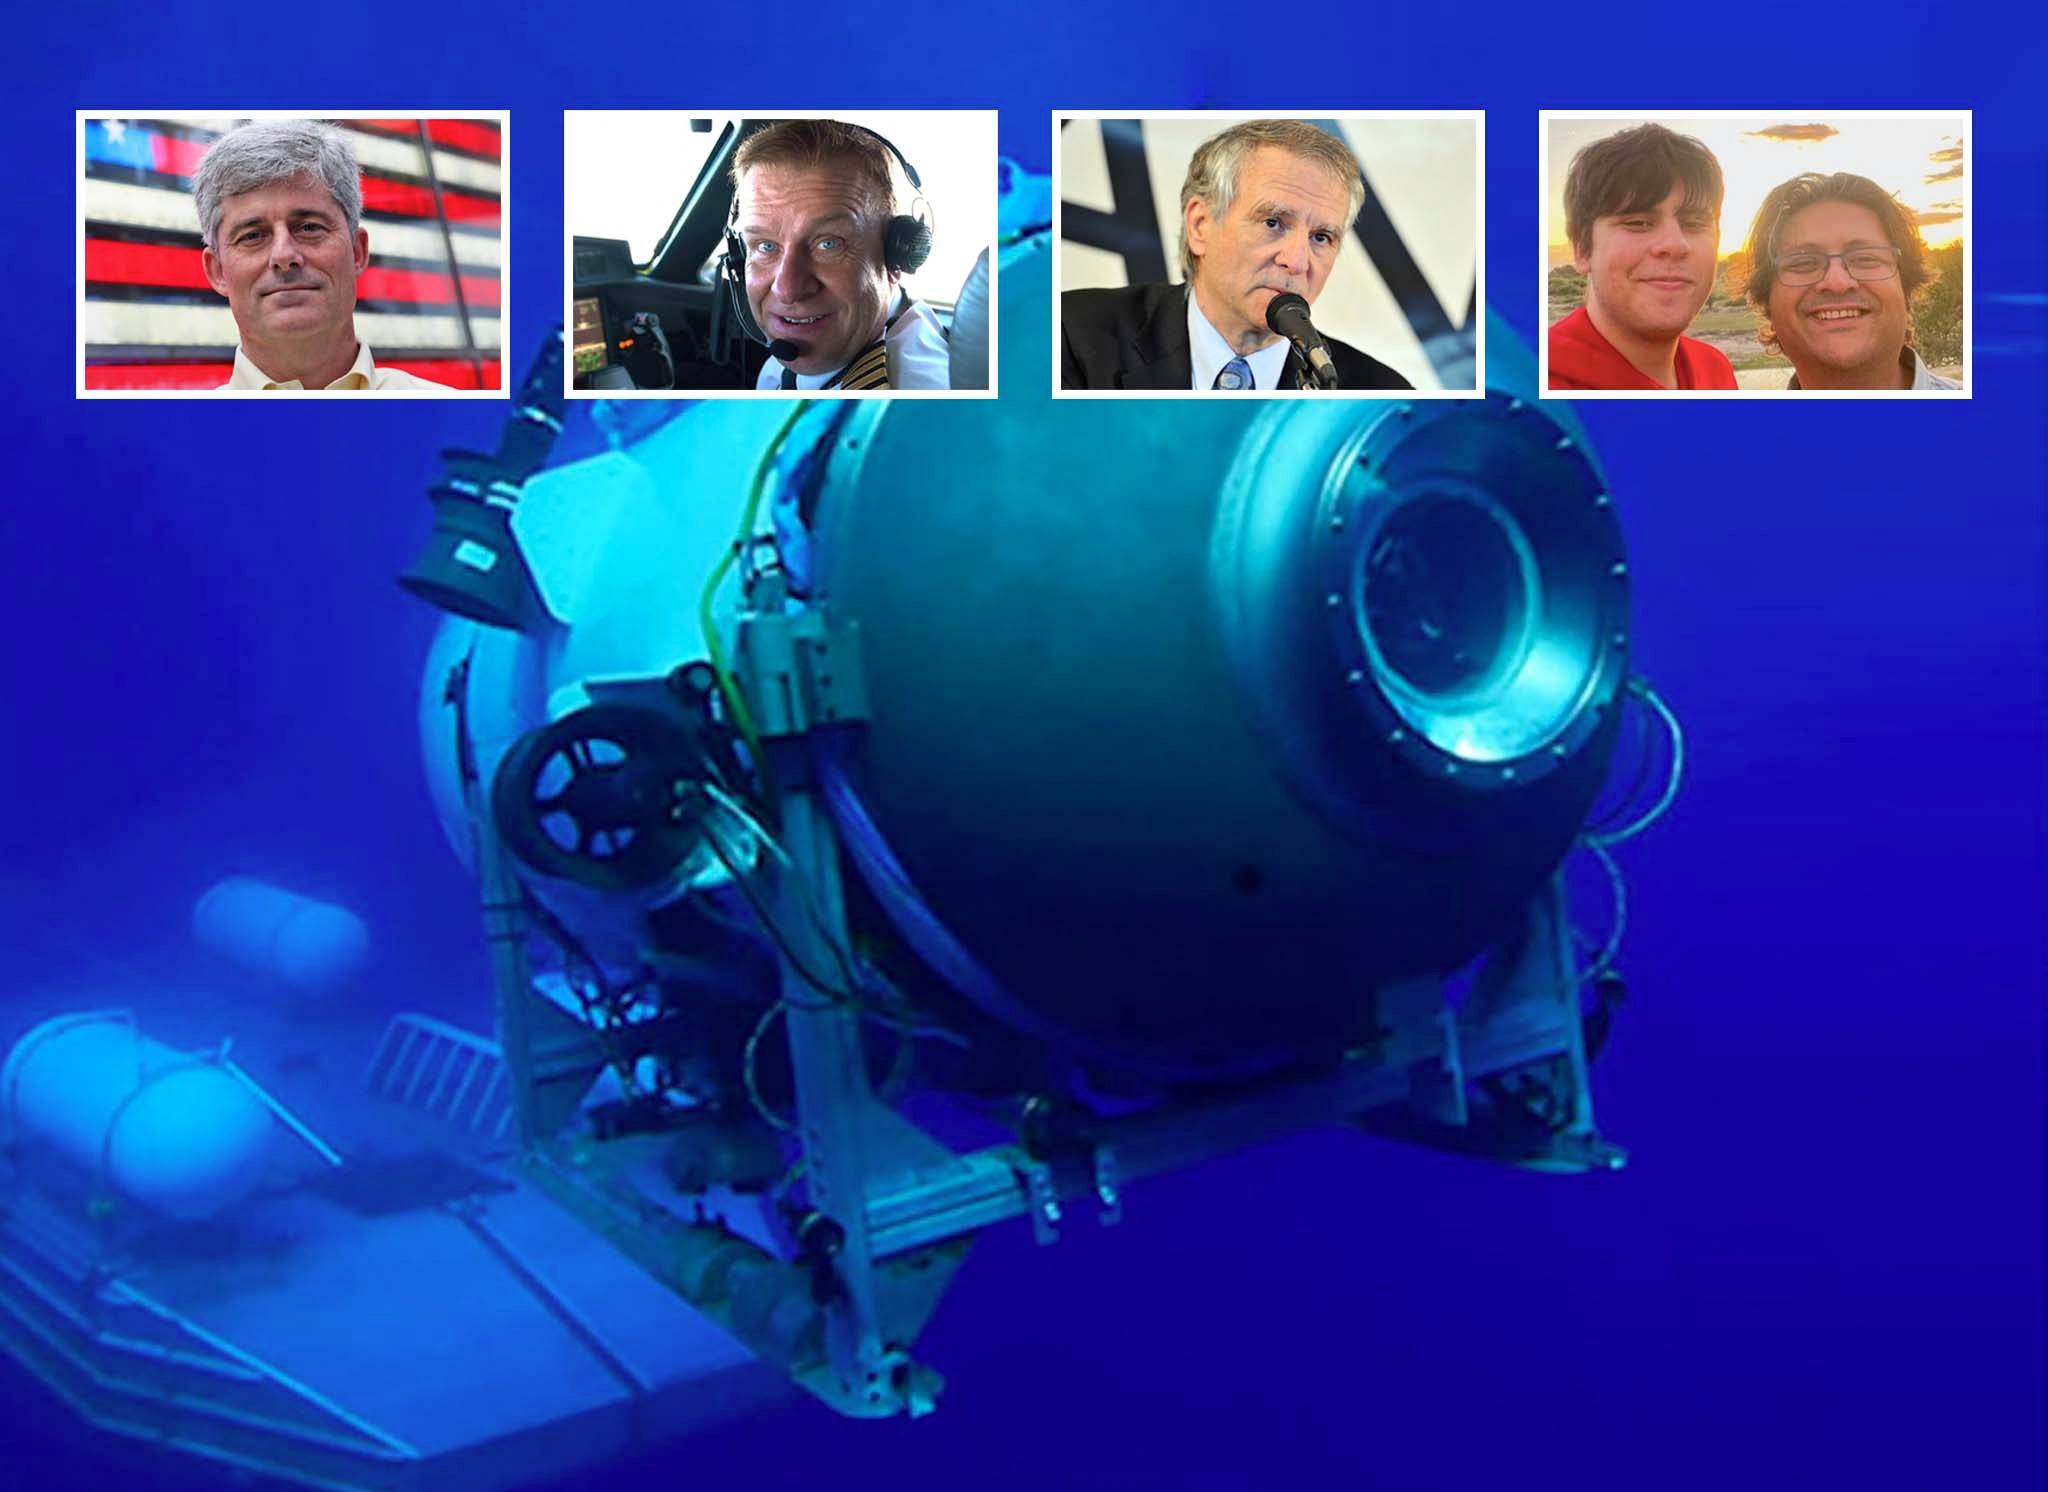 <p>From left to right: Stockton Rush, Hamish Harding, Paul-Henri Nargeolet and Shahzada and Suleman Dawood. The Titan submersible </p>